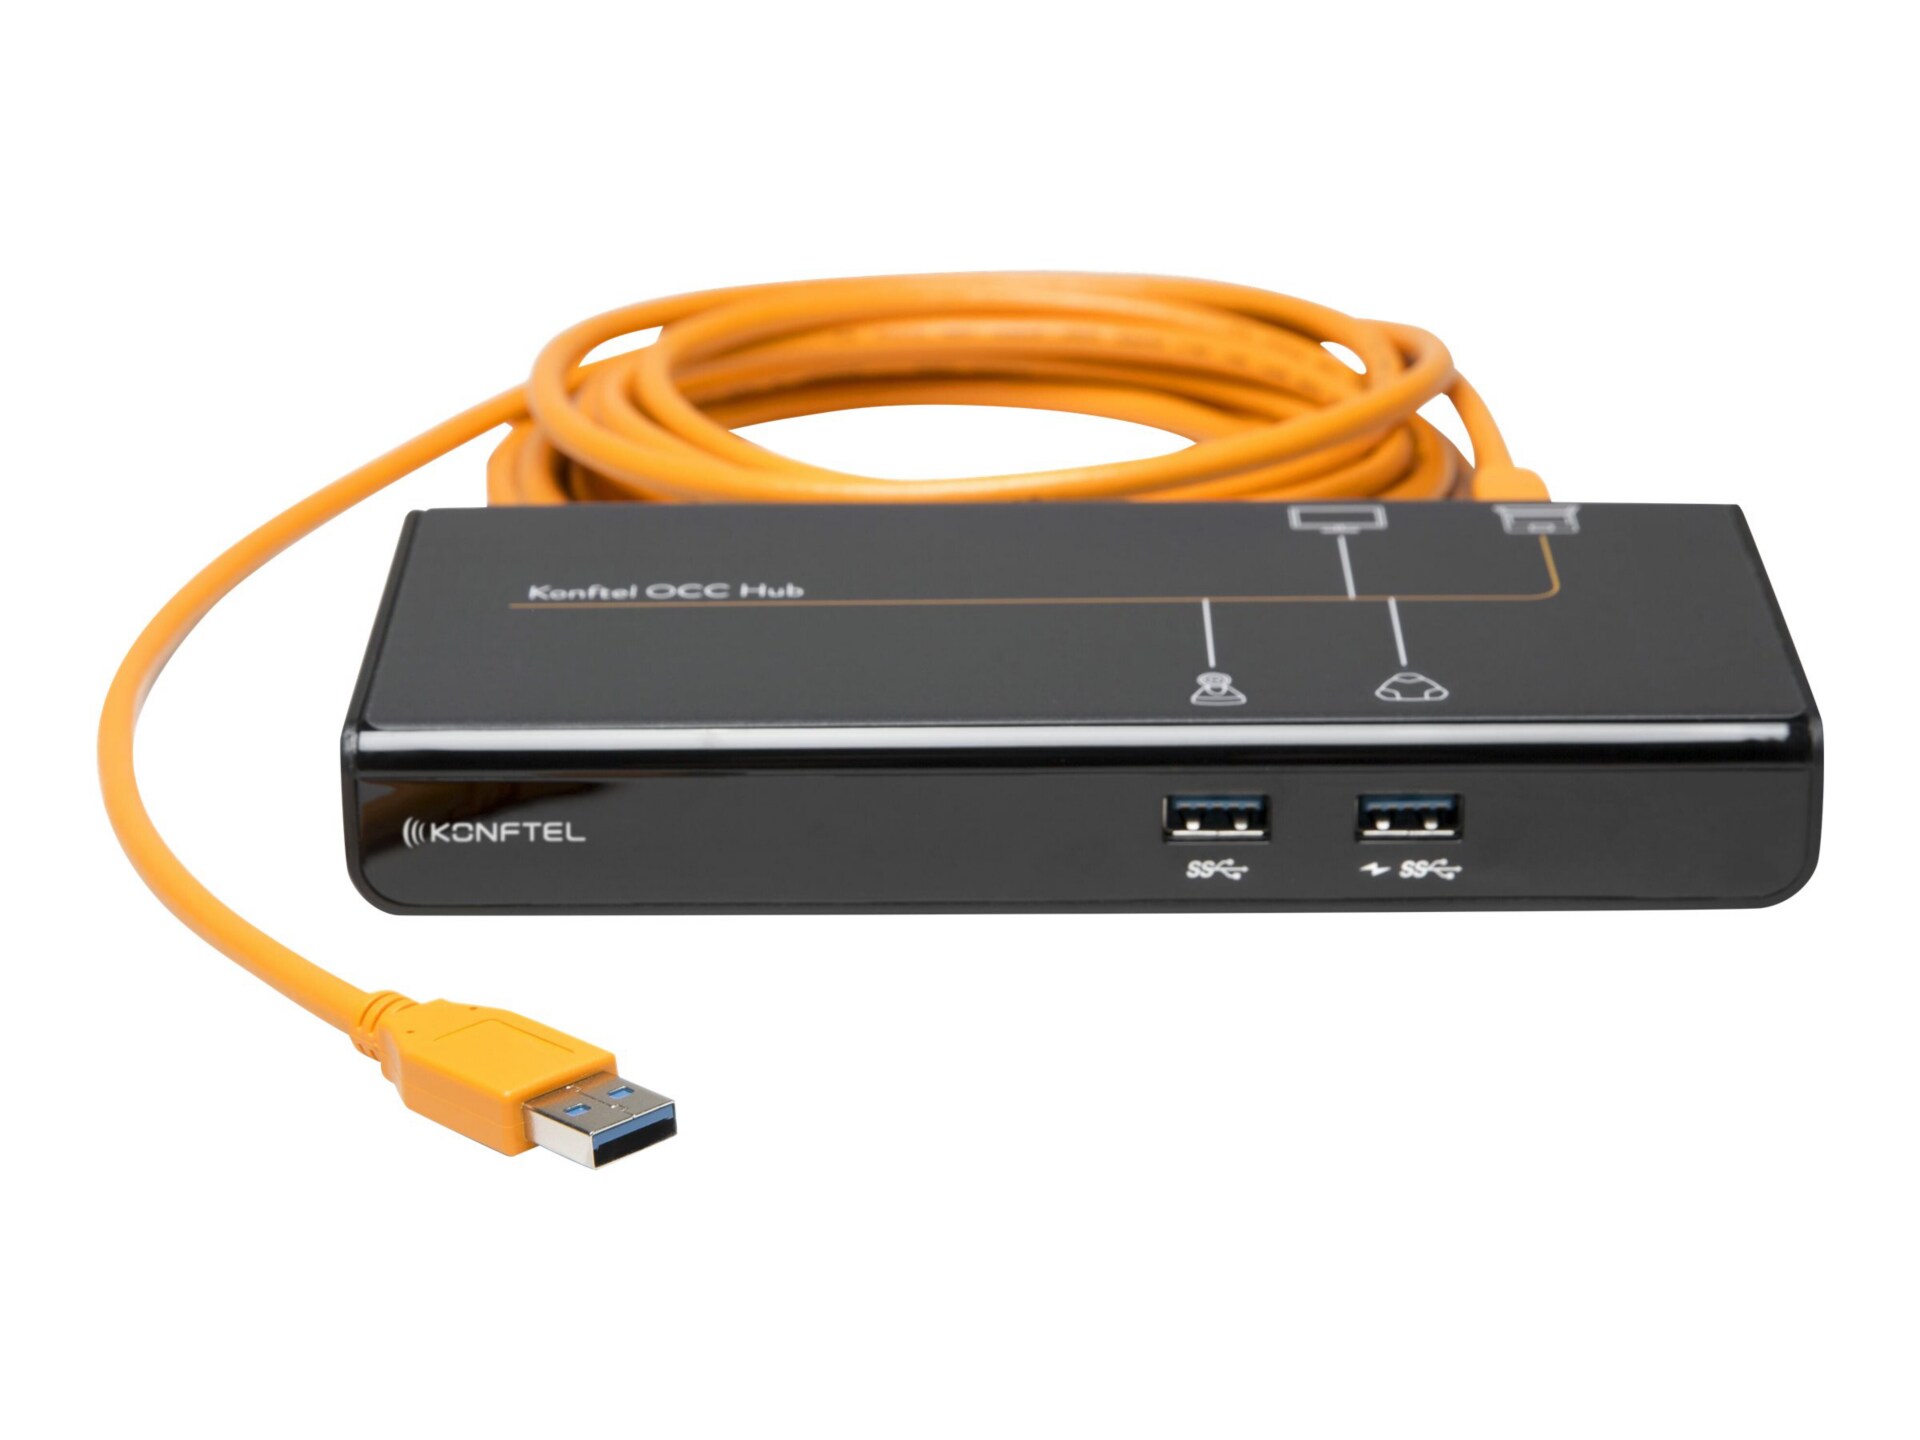 Konftel One Cable Connection Hub - video conferencing device